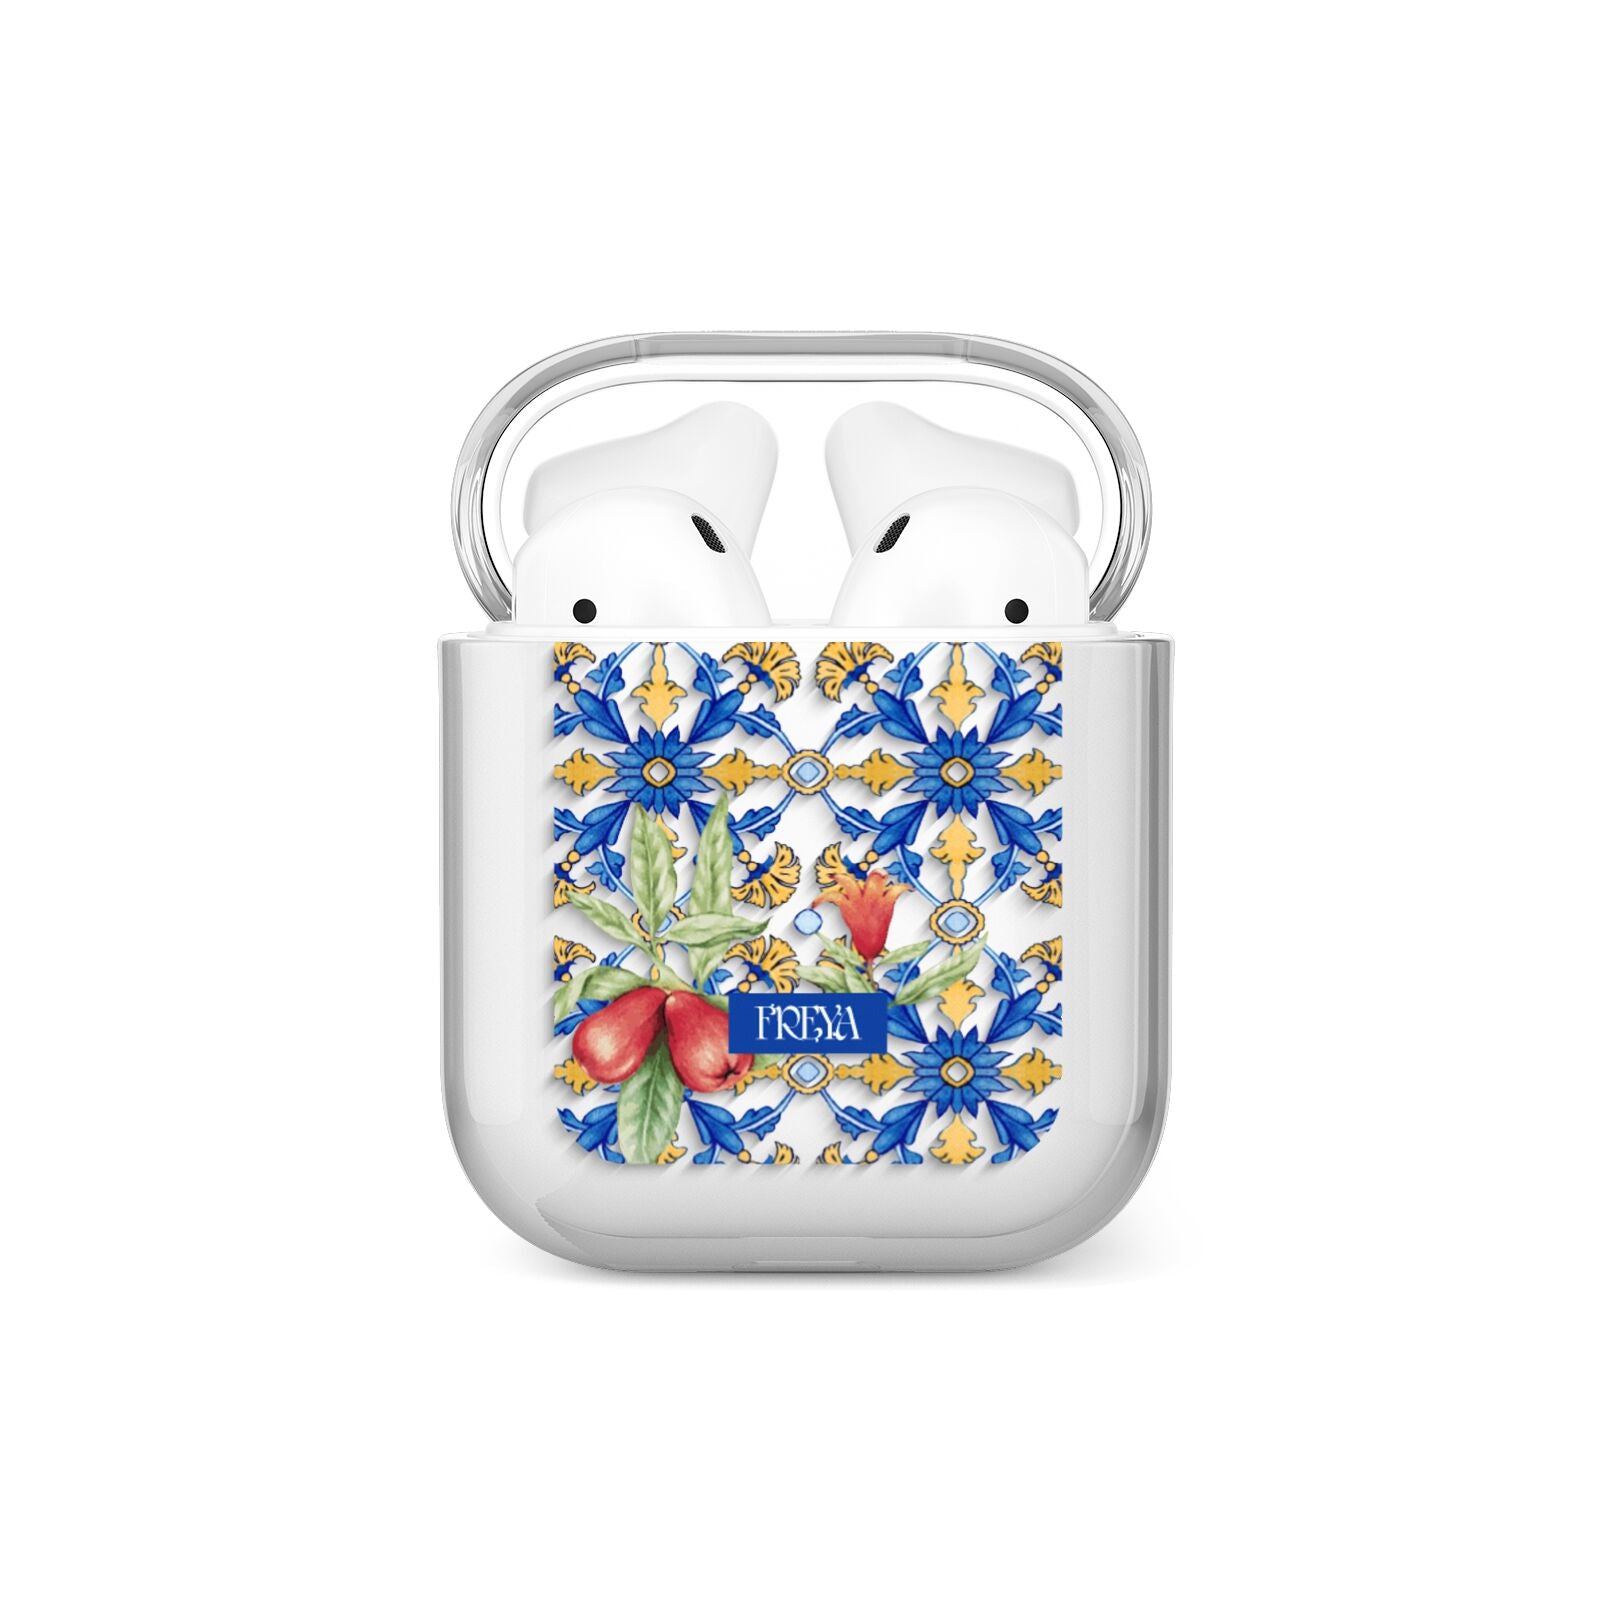 Personalised Mediterranean Fruit and Tiles AirPods Case